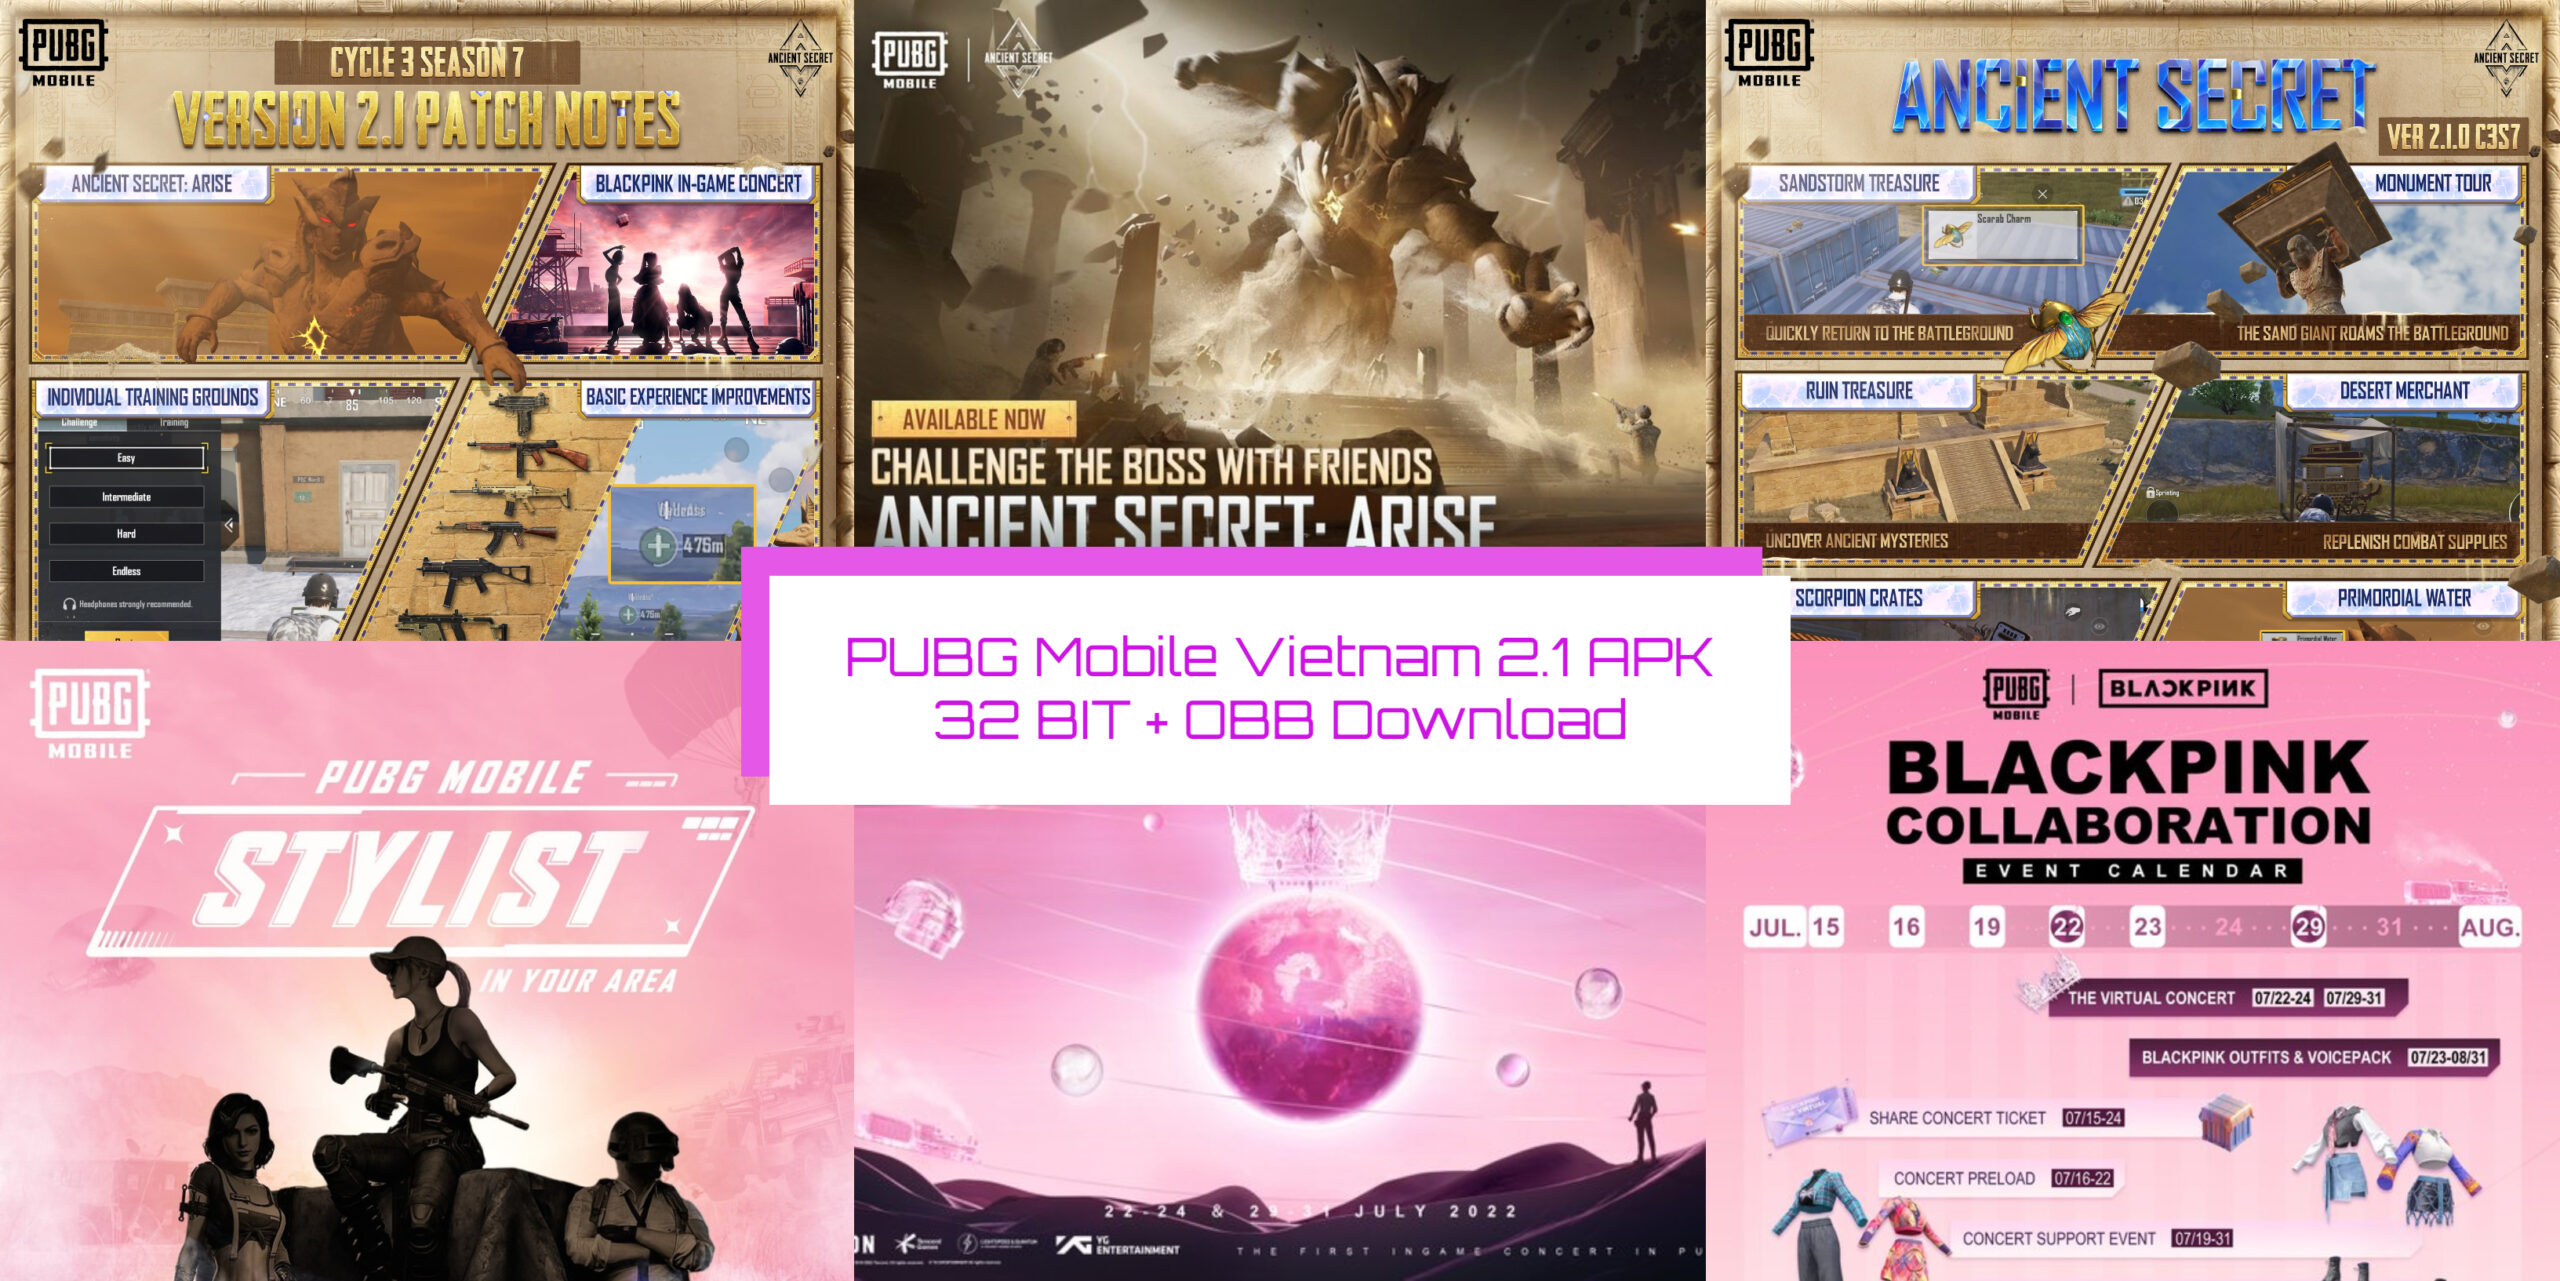 You are currently viewing PUBG Mobile Vietnam 2.1.0 APK 32 BIT + OBB Download